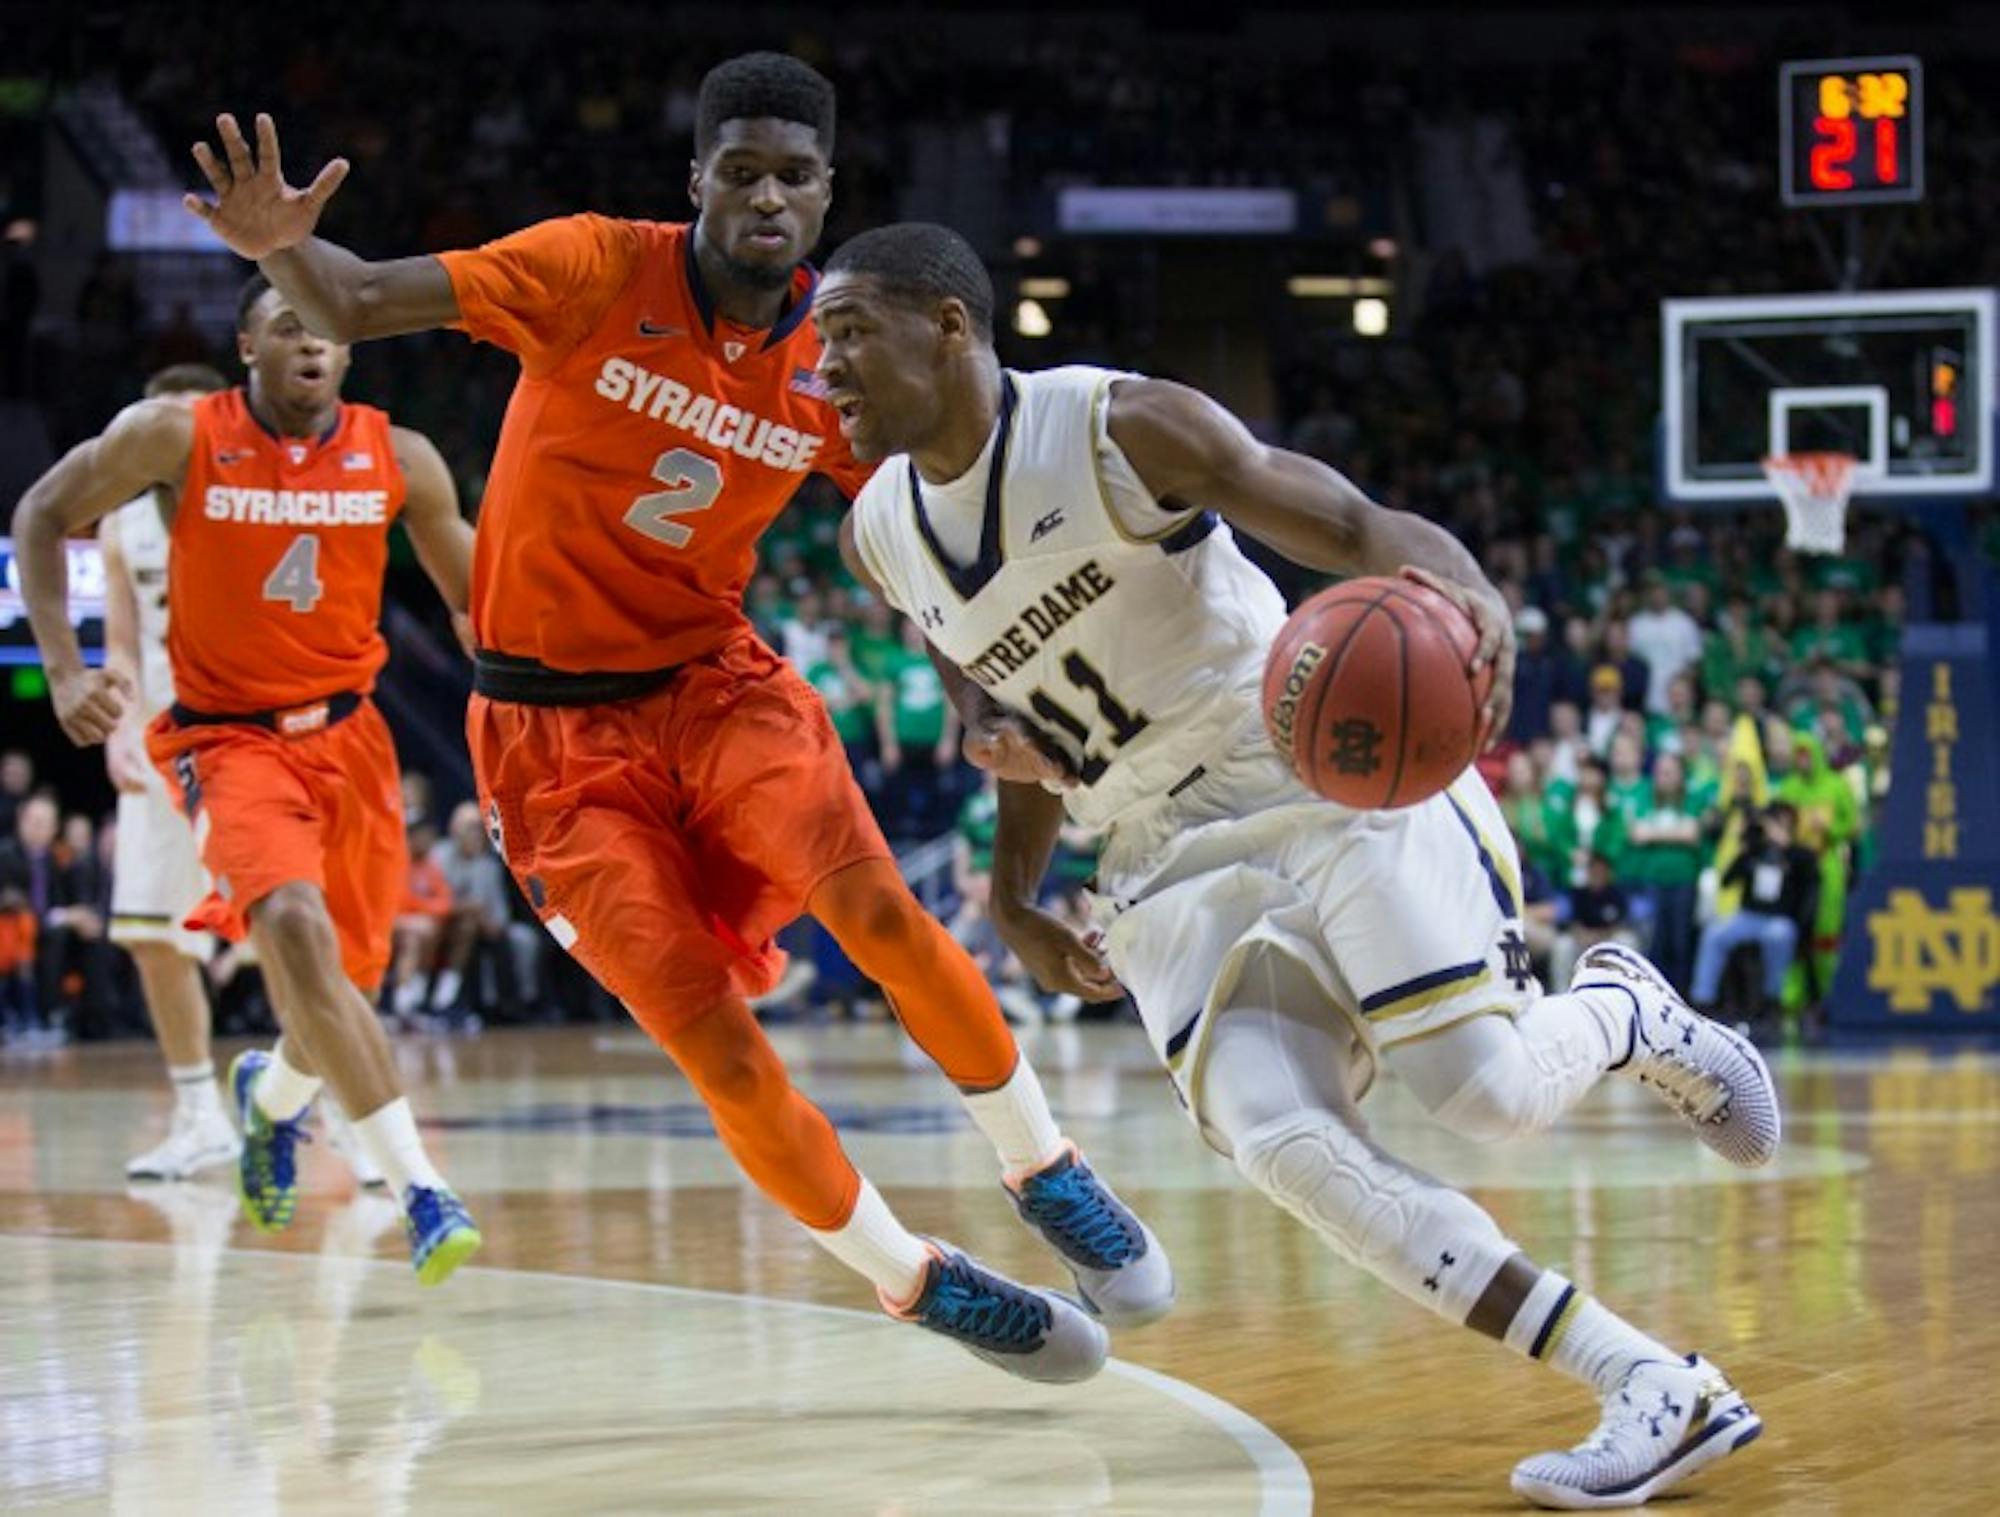 Sophomore guard Demetrius Jackson cuts by a defender in the Irish loss to Syracuse on Tuesday at Purcell Pavilion.